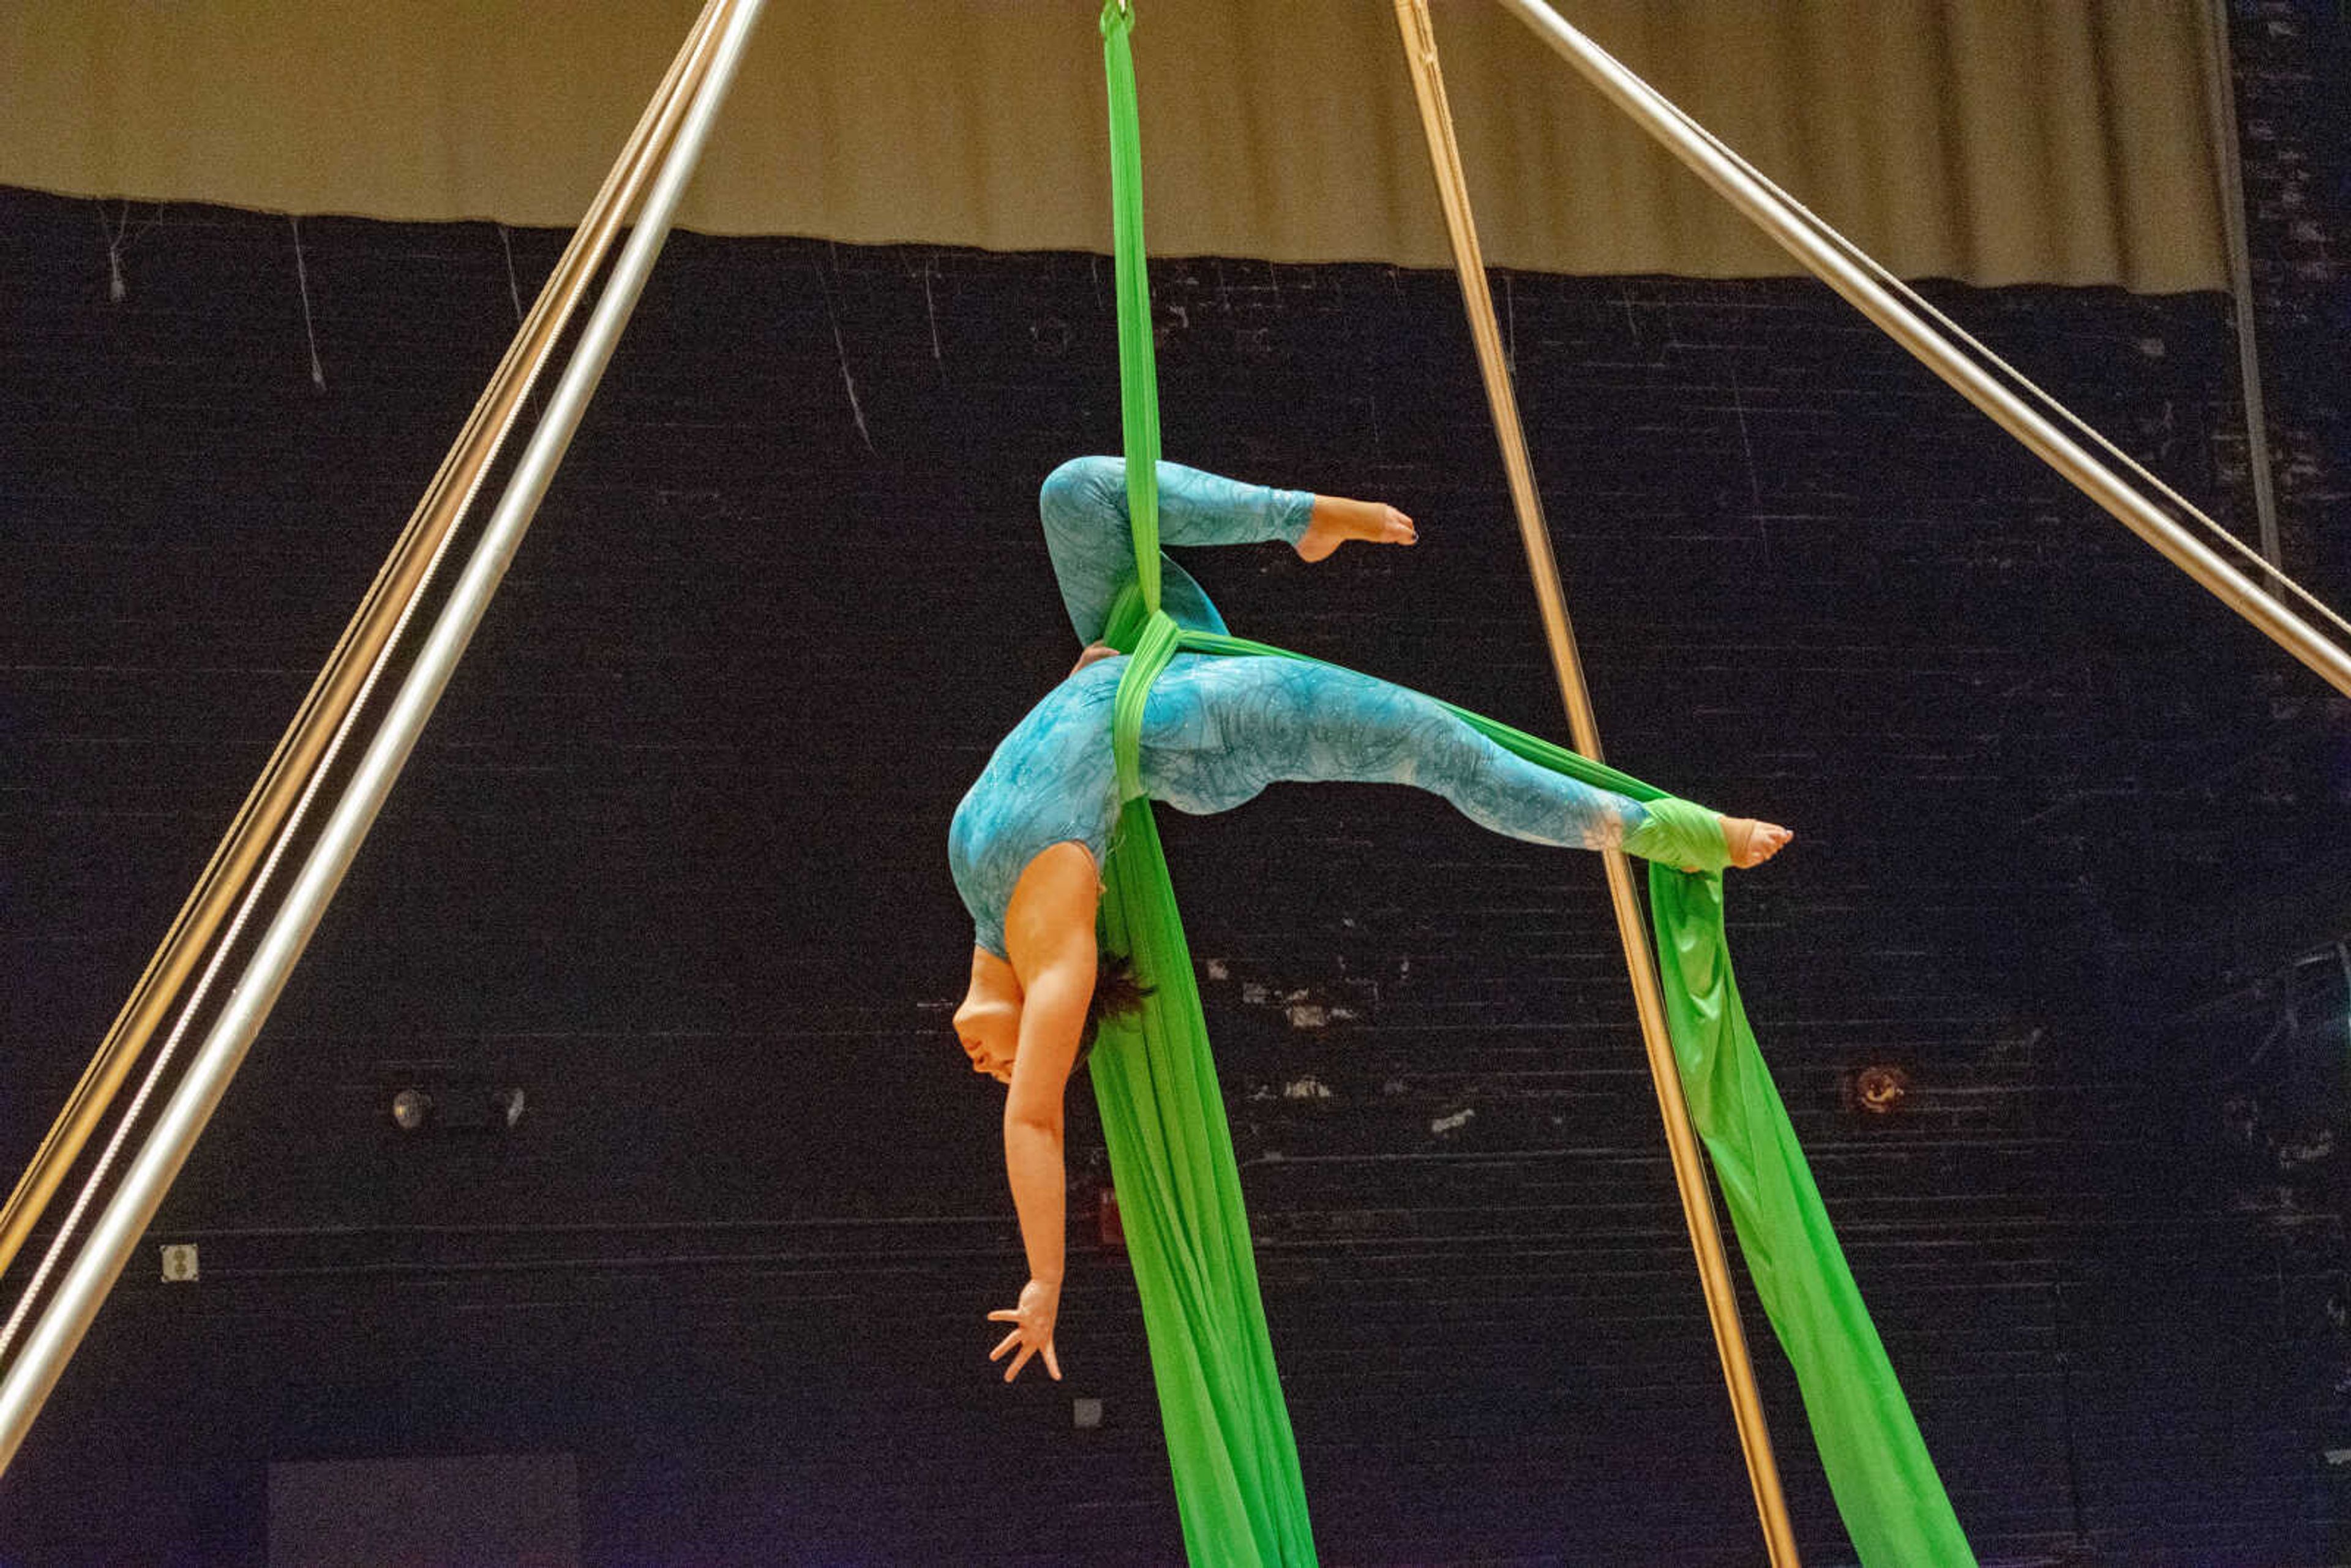 Alex Major, Aerial Artist, holding the Gazelle pose during her performance at the Homecoming Talent Show, Oct. 22, 2019, Cape Girardeau.